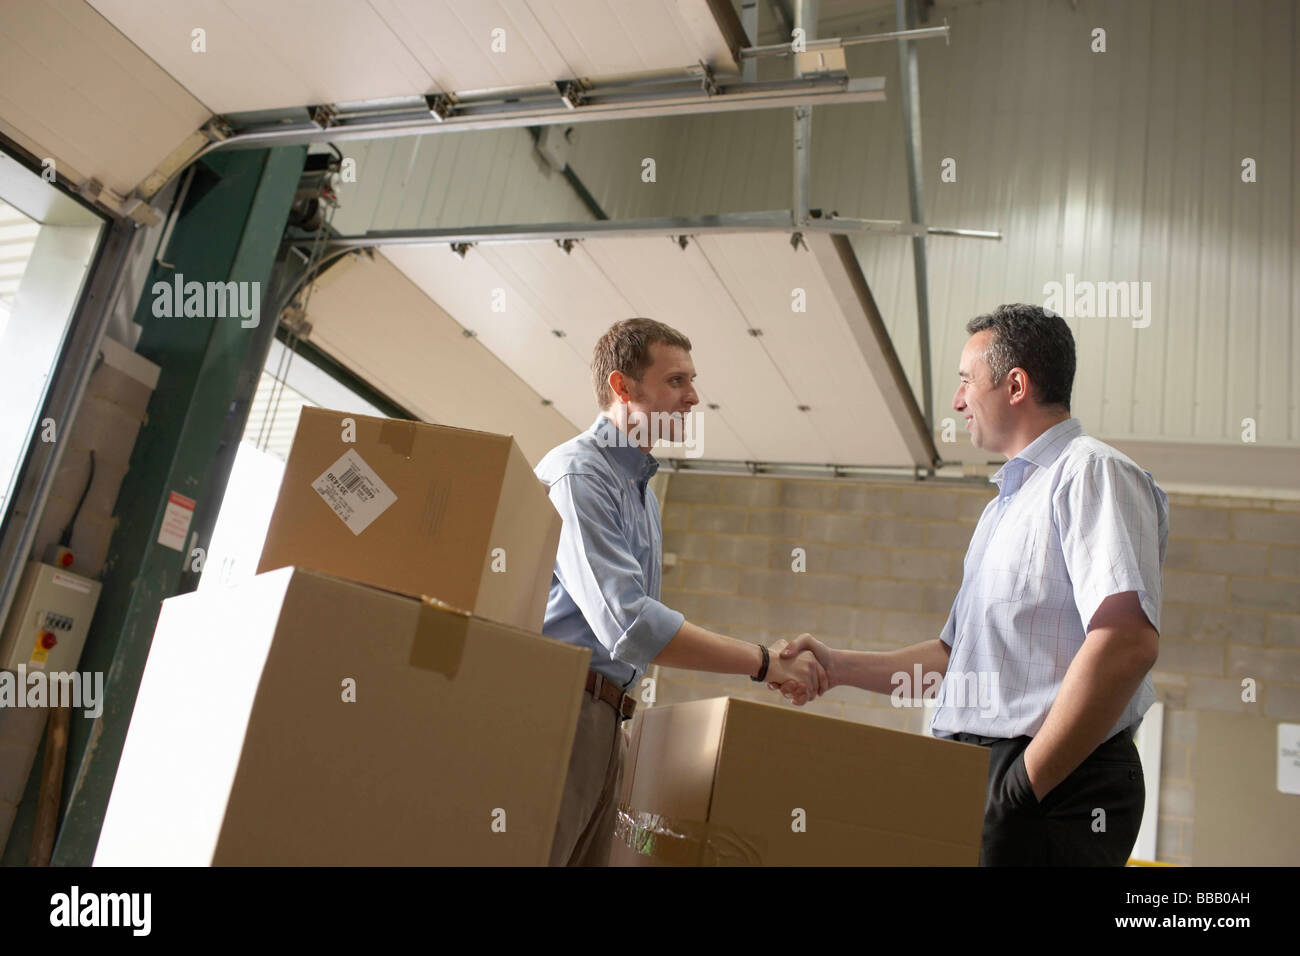 Two businessmen in warehouse Stock Photo